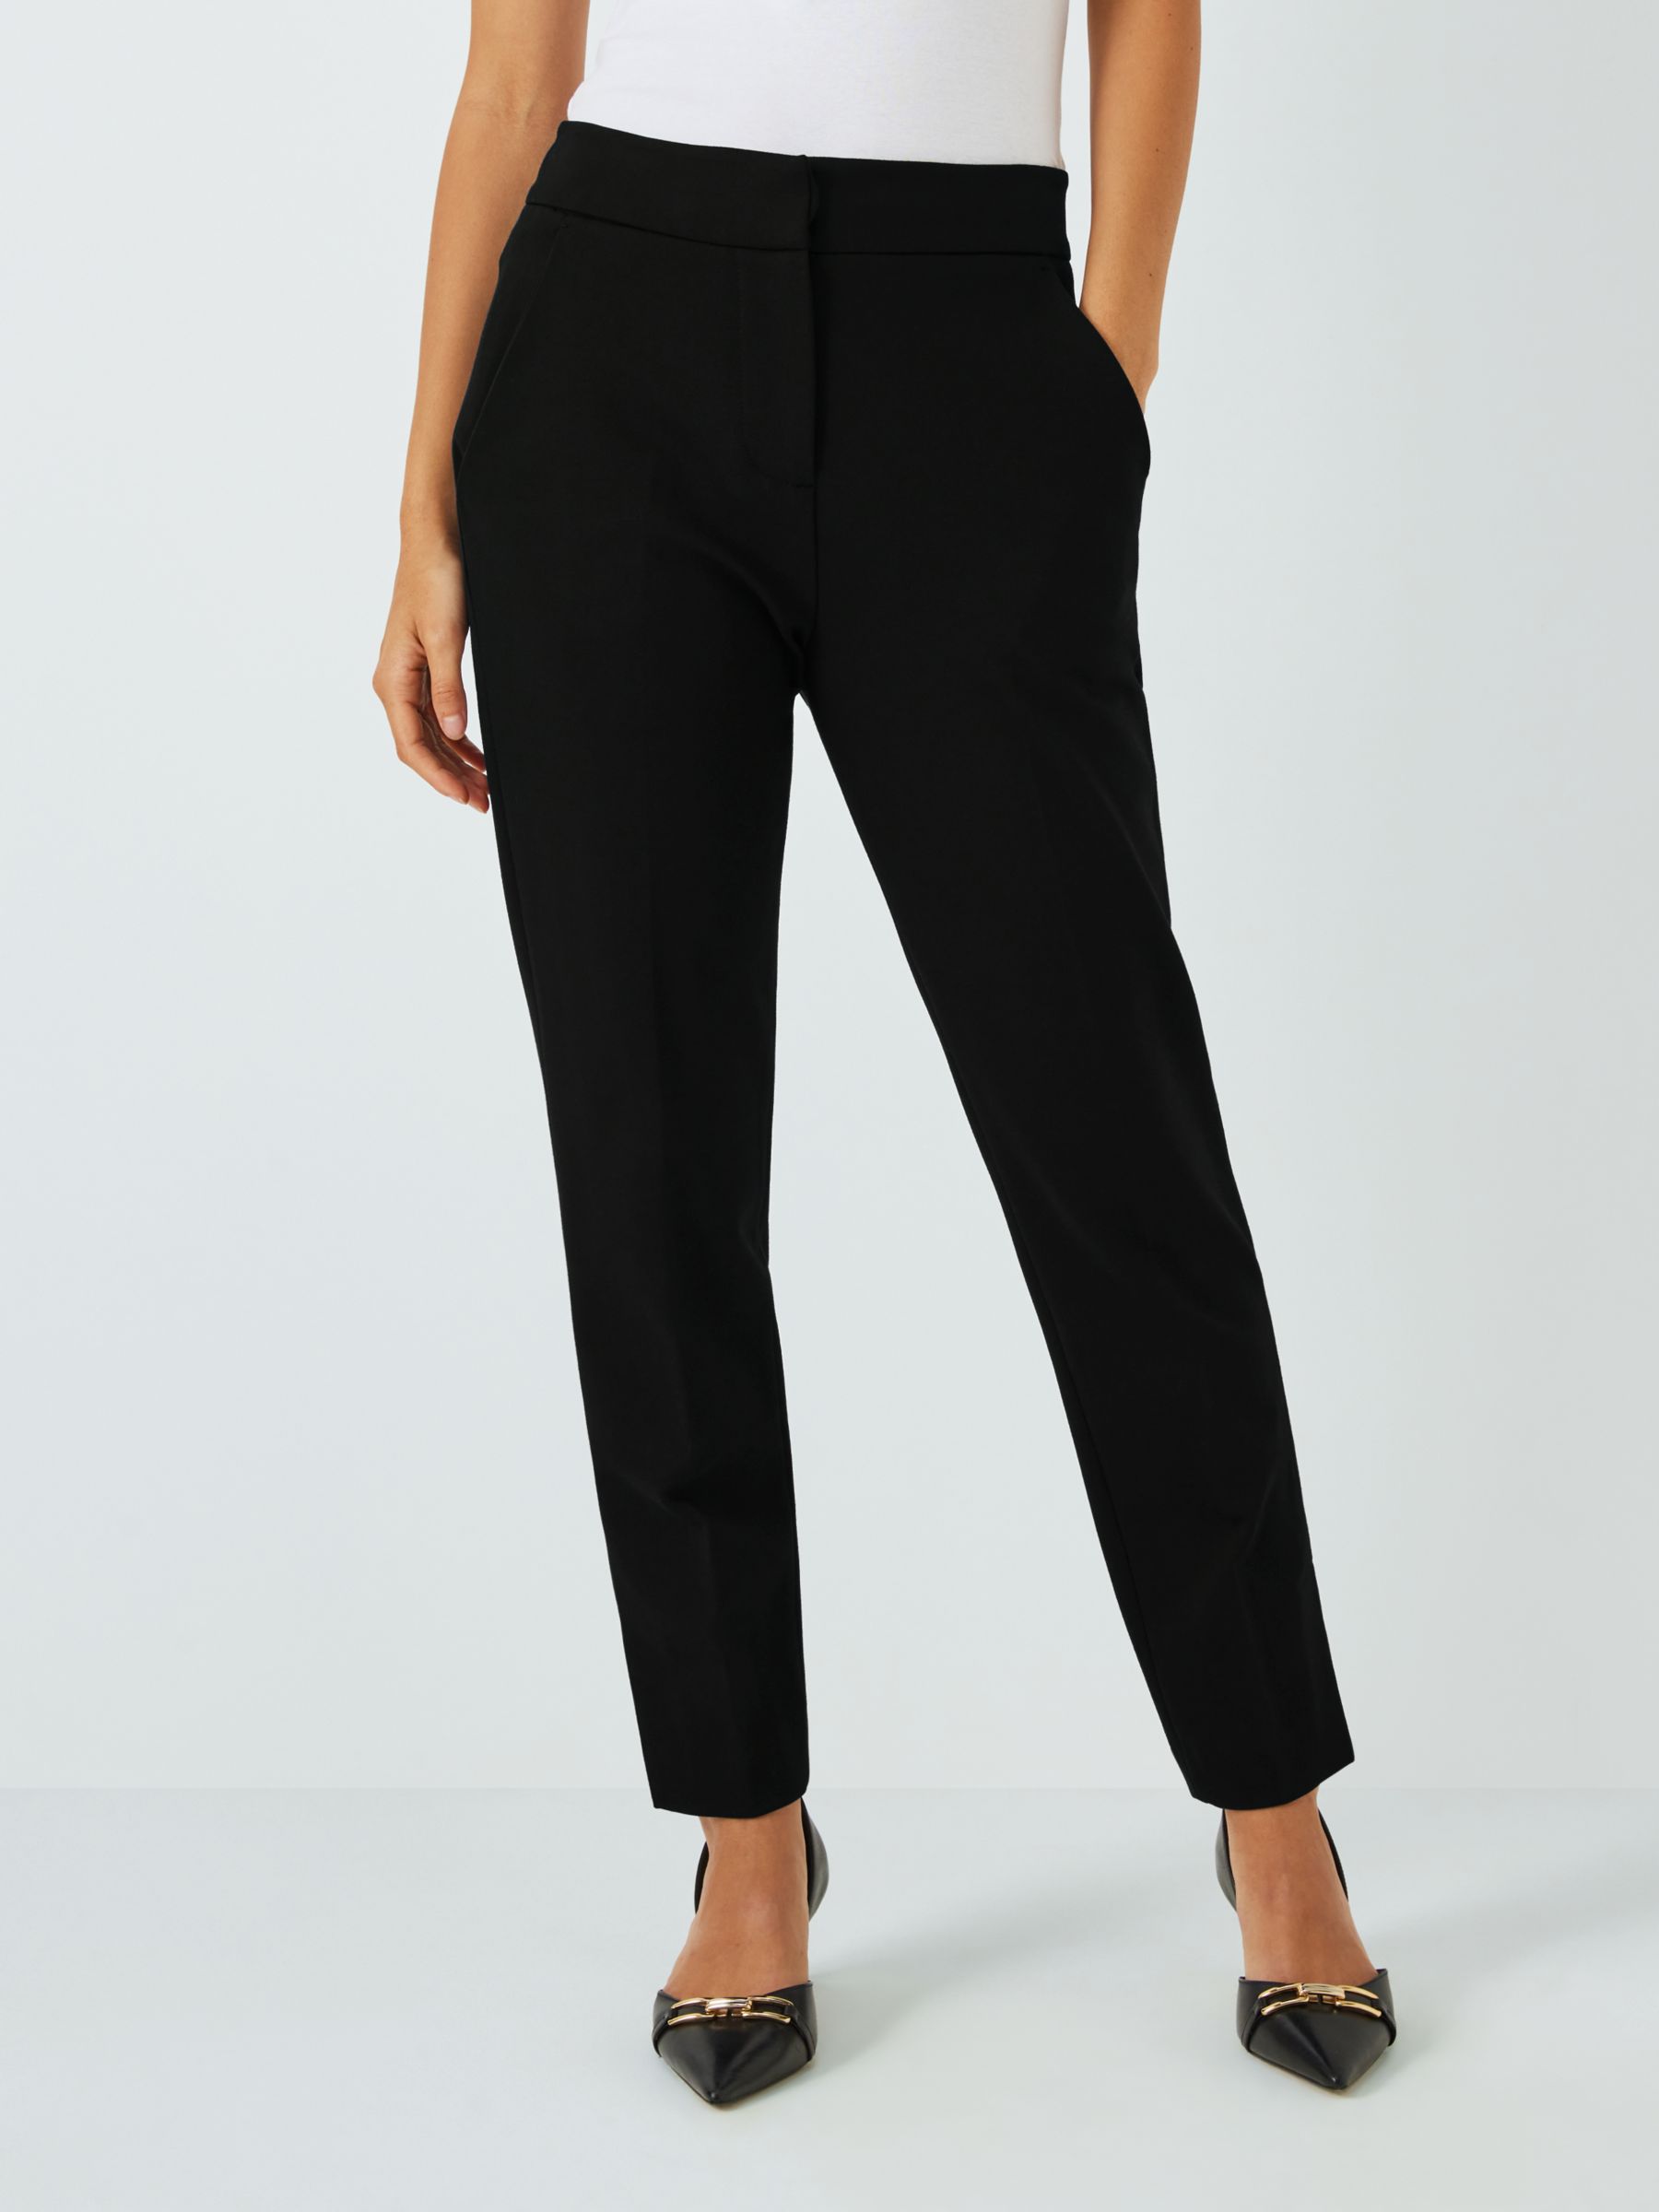 Buy Ponte Ski Pant, Fast Home Delivery